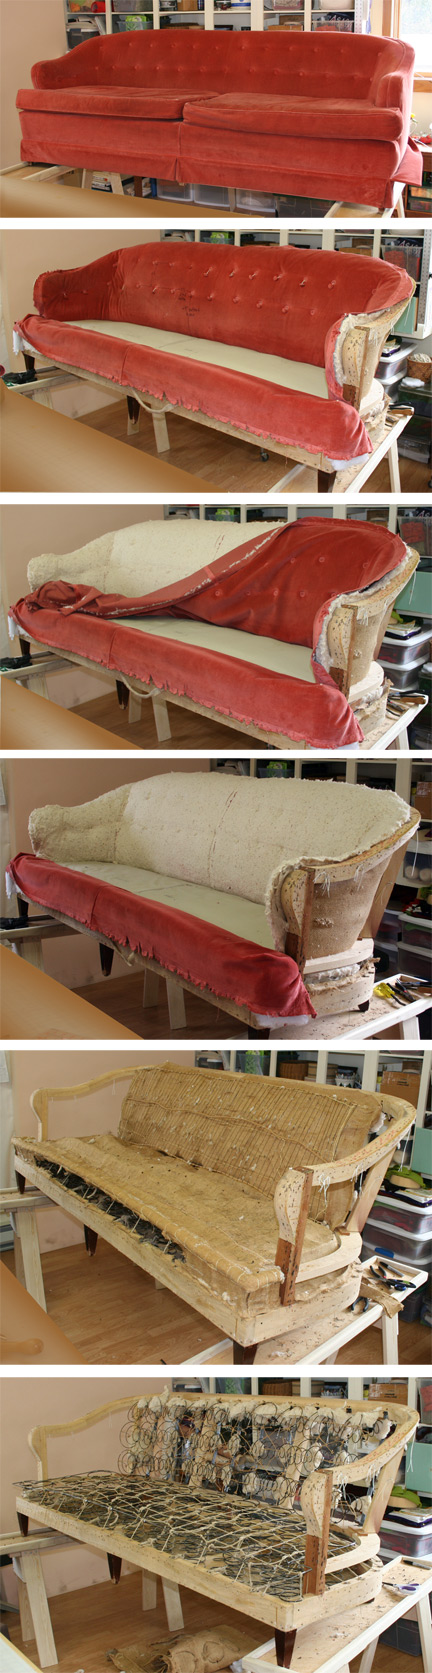 Removing the layers of upholstery down to the springs